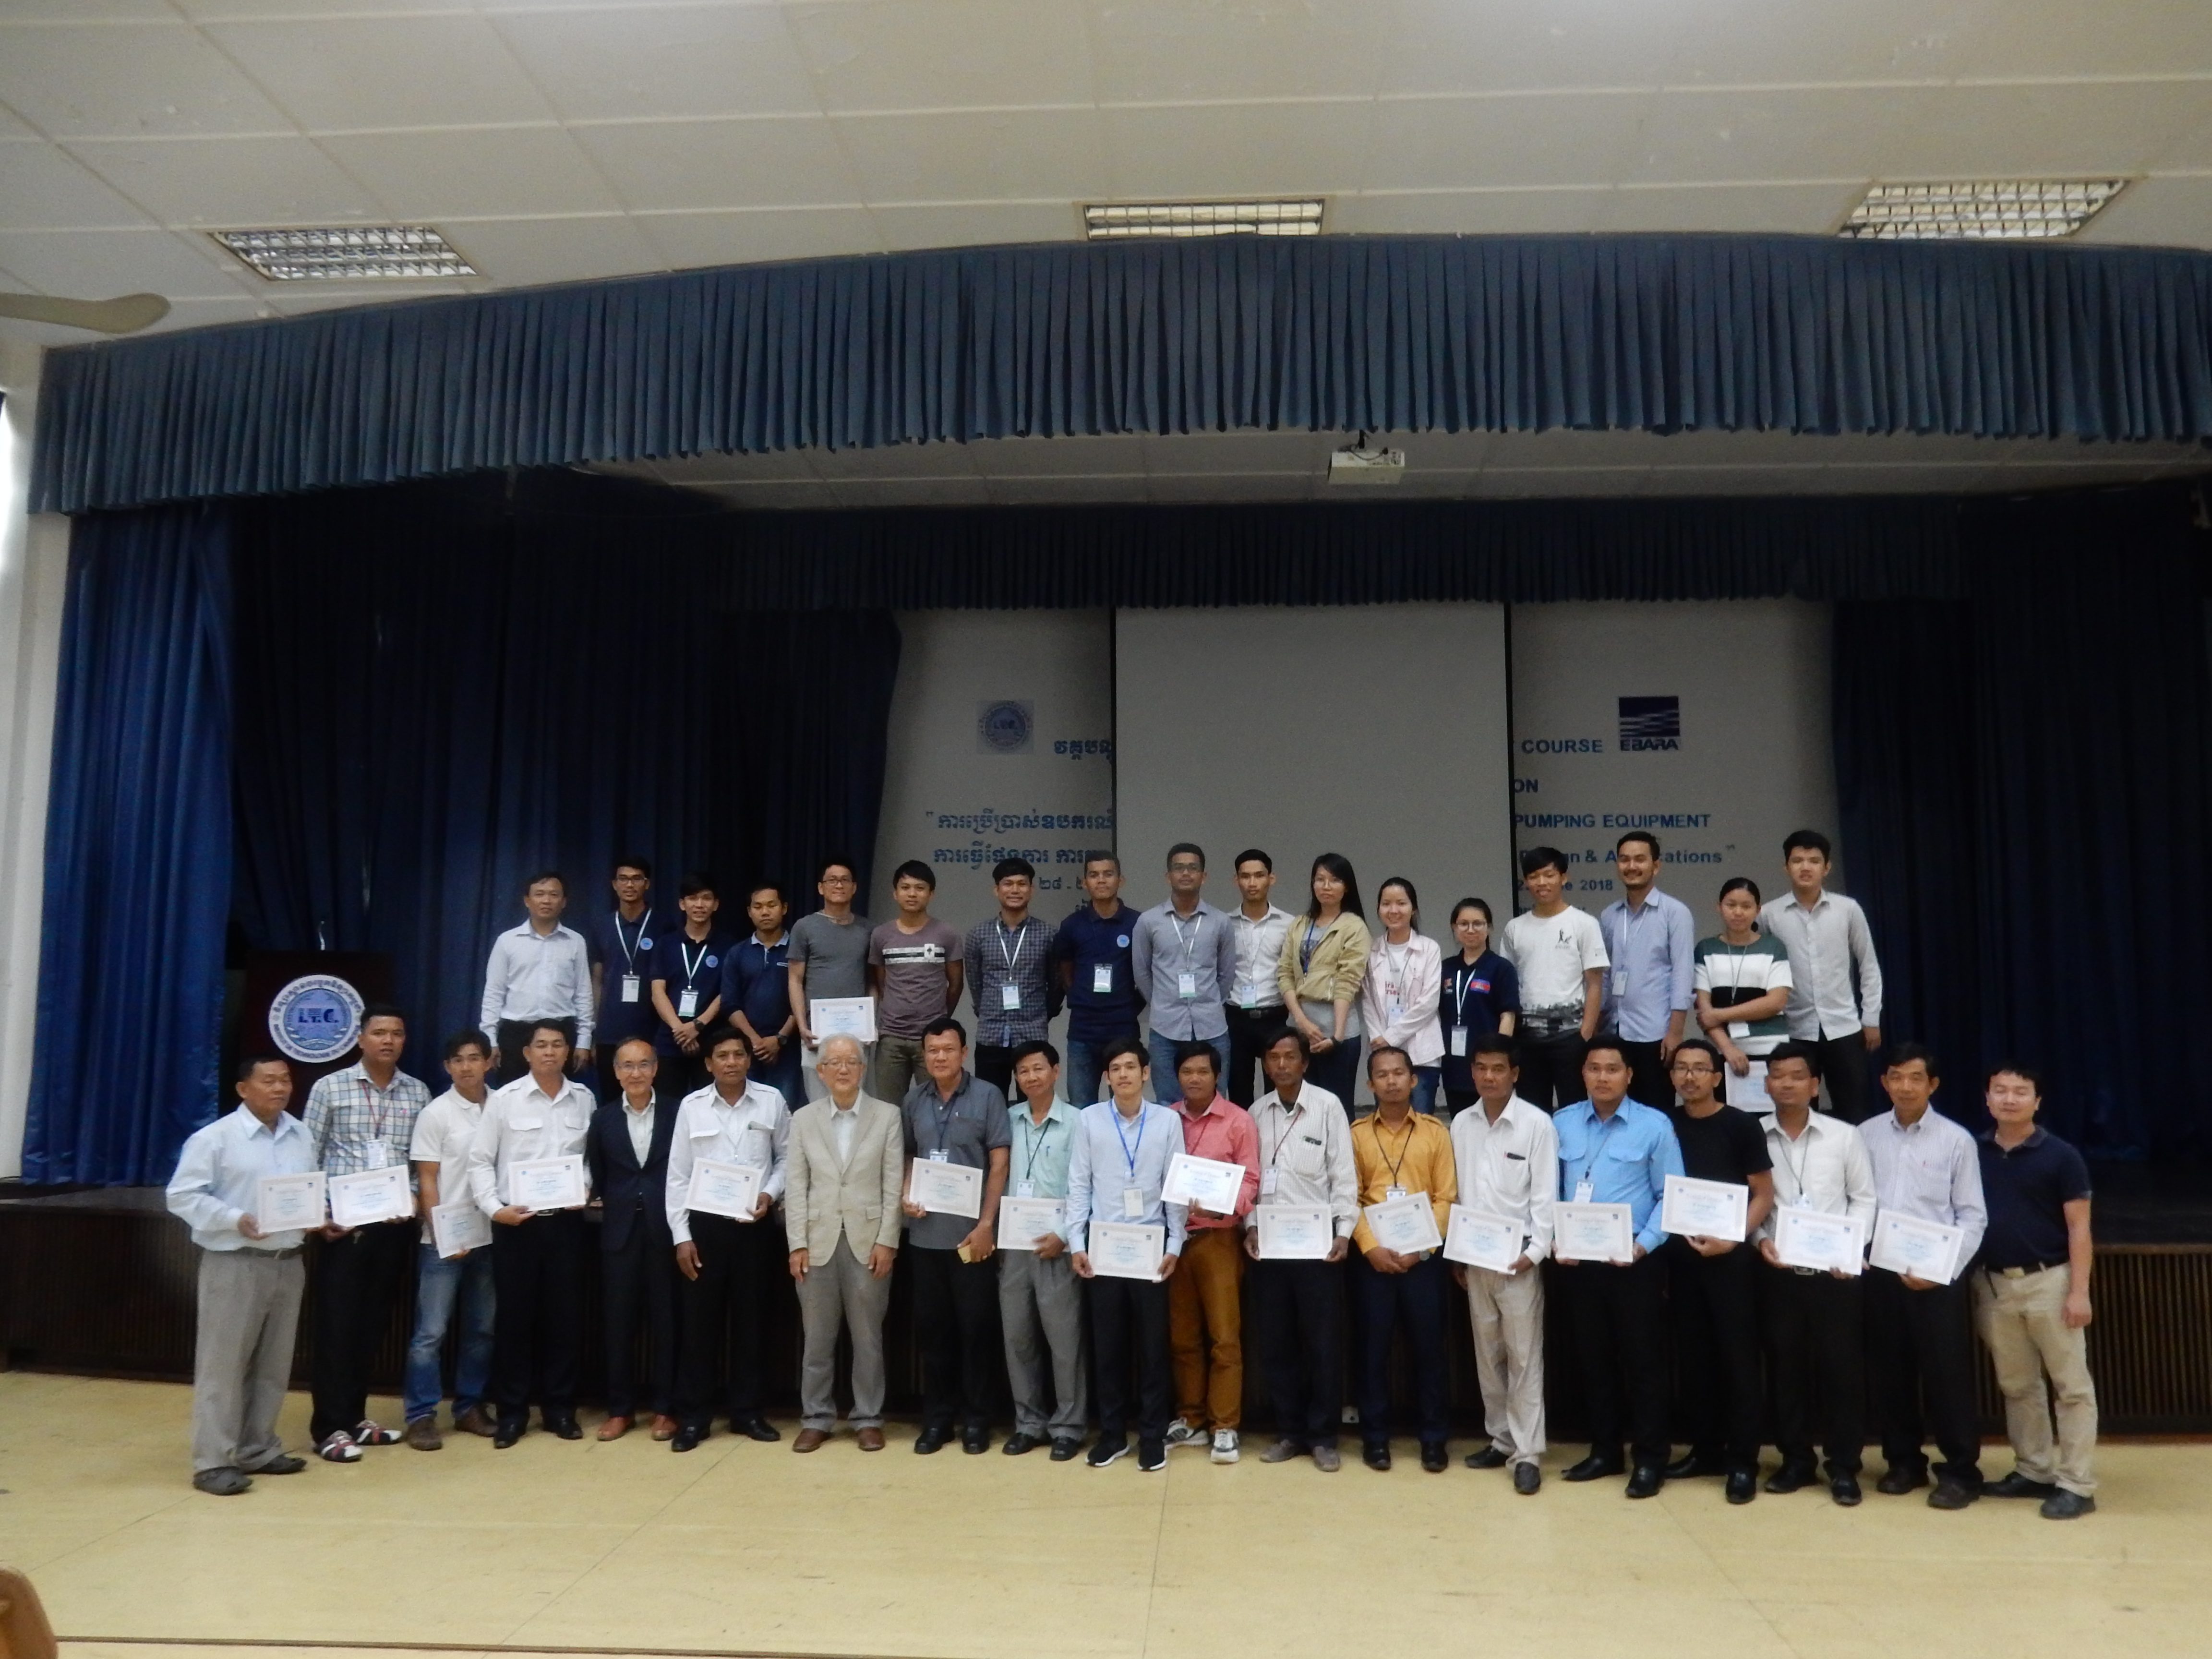 Participants of the recent Ebara pump technology seminar at the Institute of Technology of Cambodia in Phnom Penh